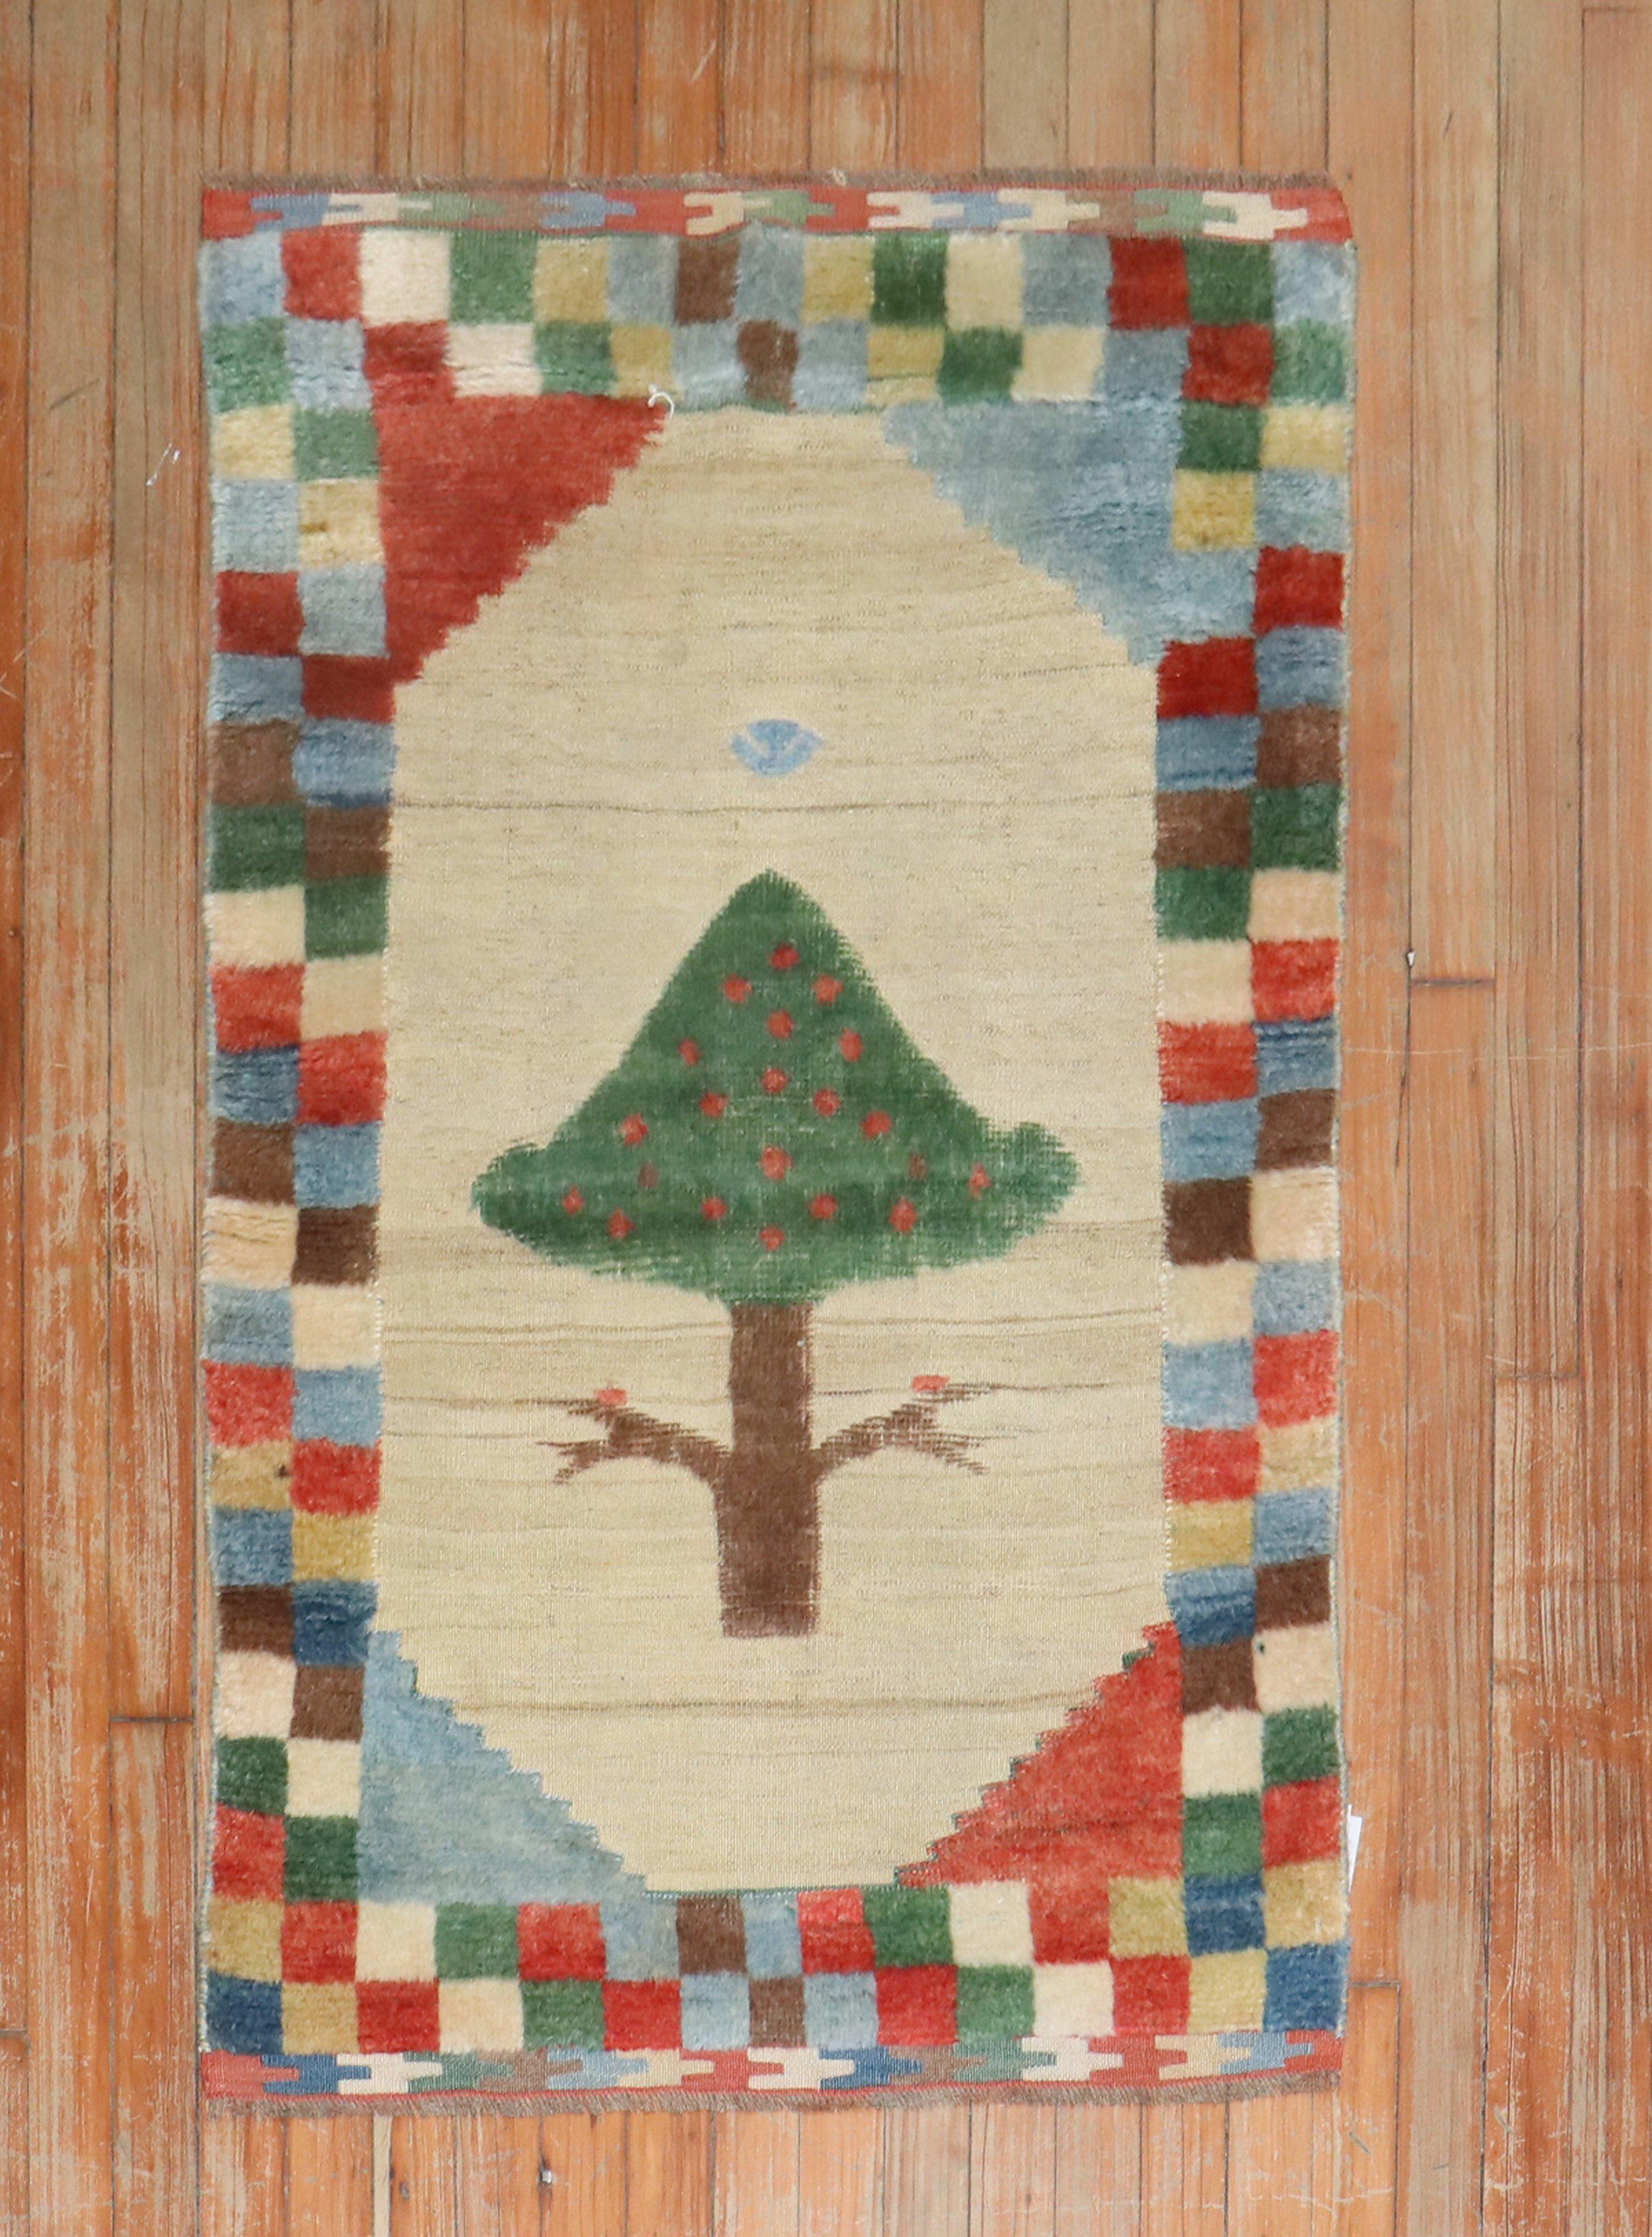 A late-20th century Gabbeh rug with a checkered colorful border surrounded by a stand-alone tree on a camel ground woven with a souf technique

Measures: 2'6'' x 3'11''

Souf rugs are a very rare technique found as they have a raised low and high